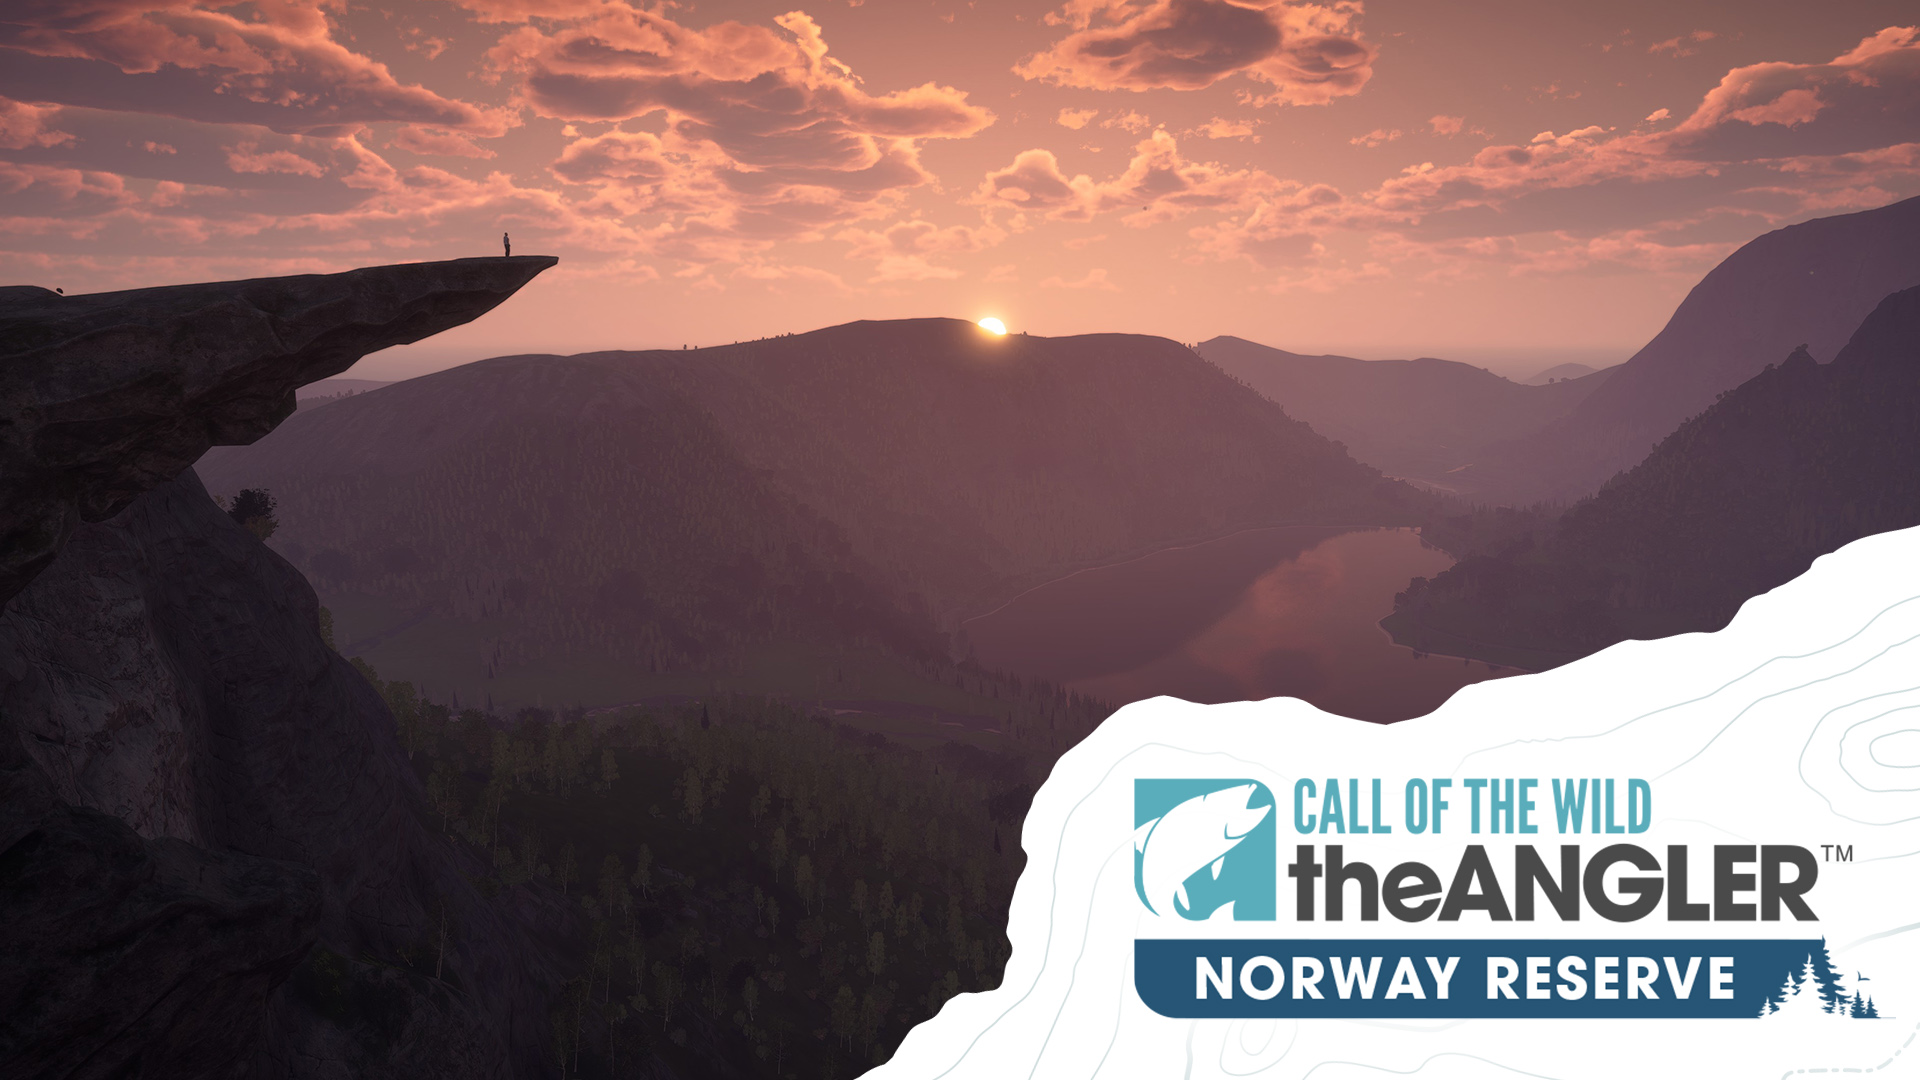 Call of the Wild: The Angler™ - Norway Reserve 